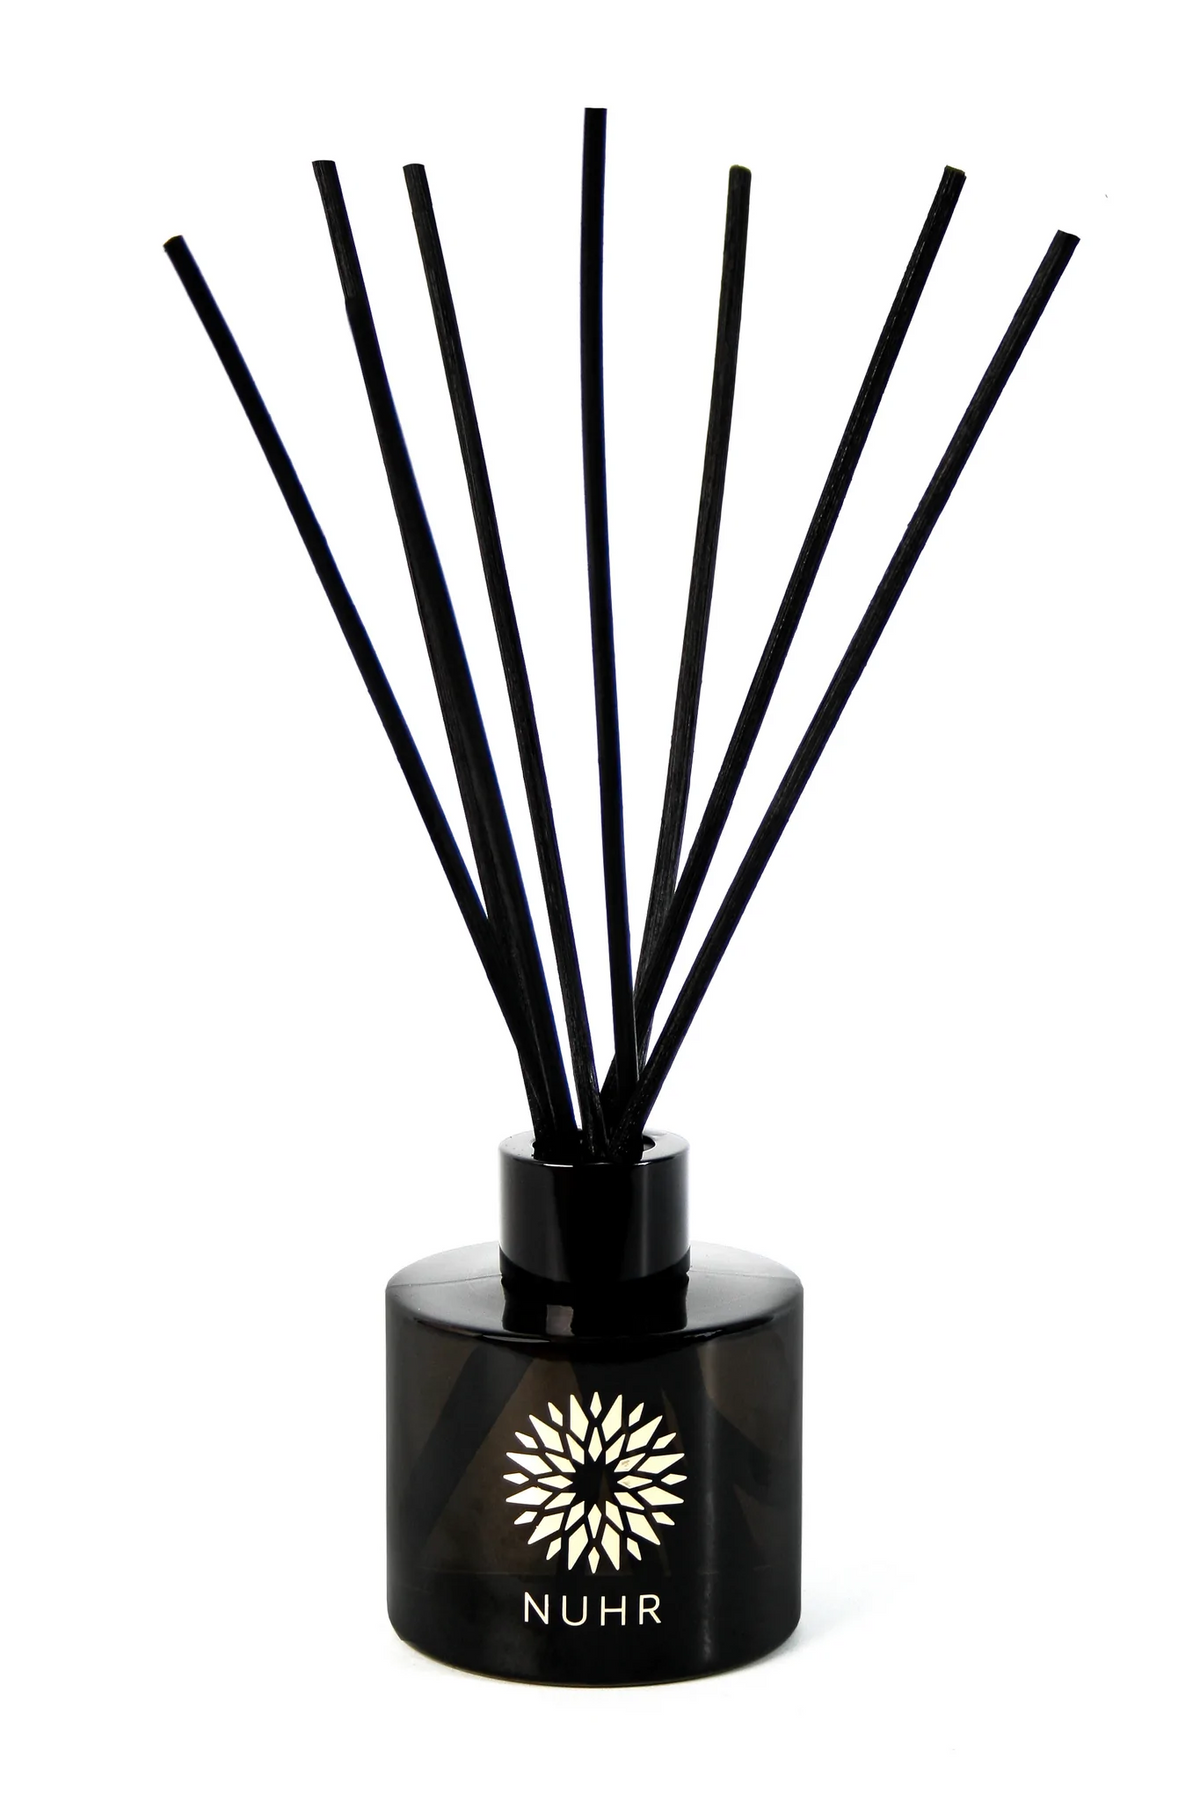 Oud &amp; Amber Luxury Reed Diffuser